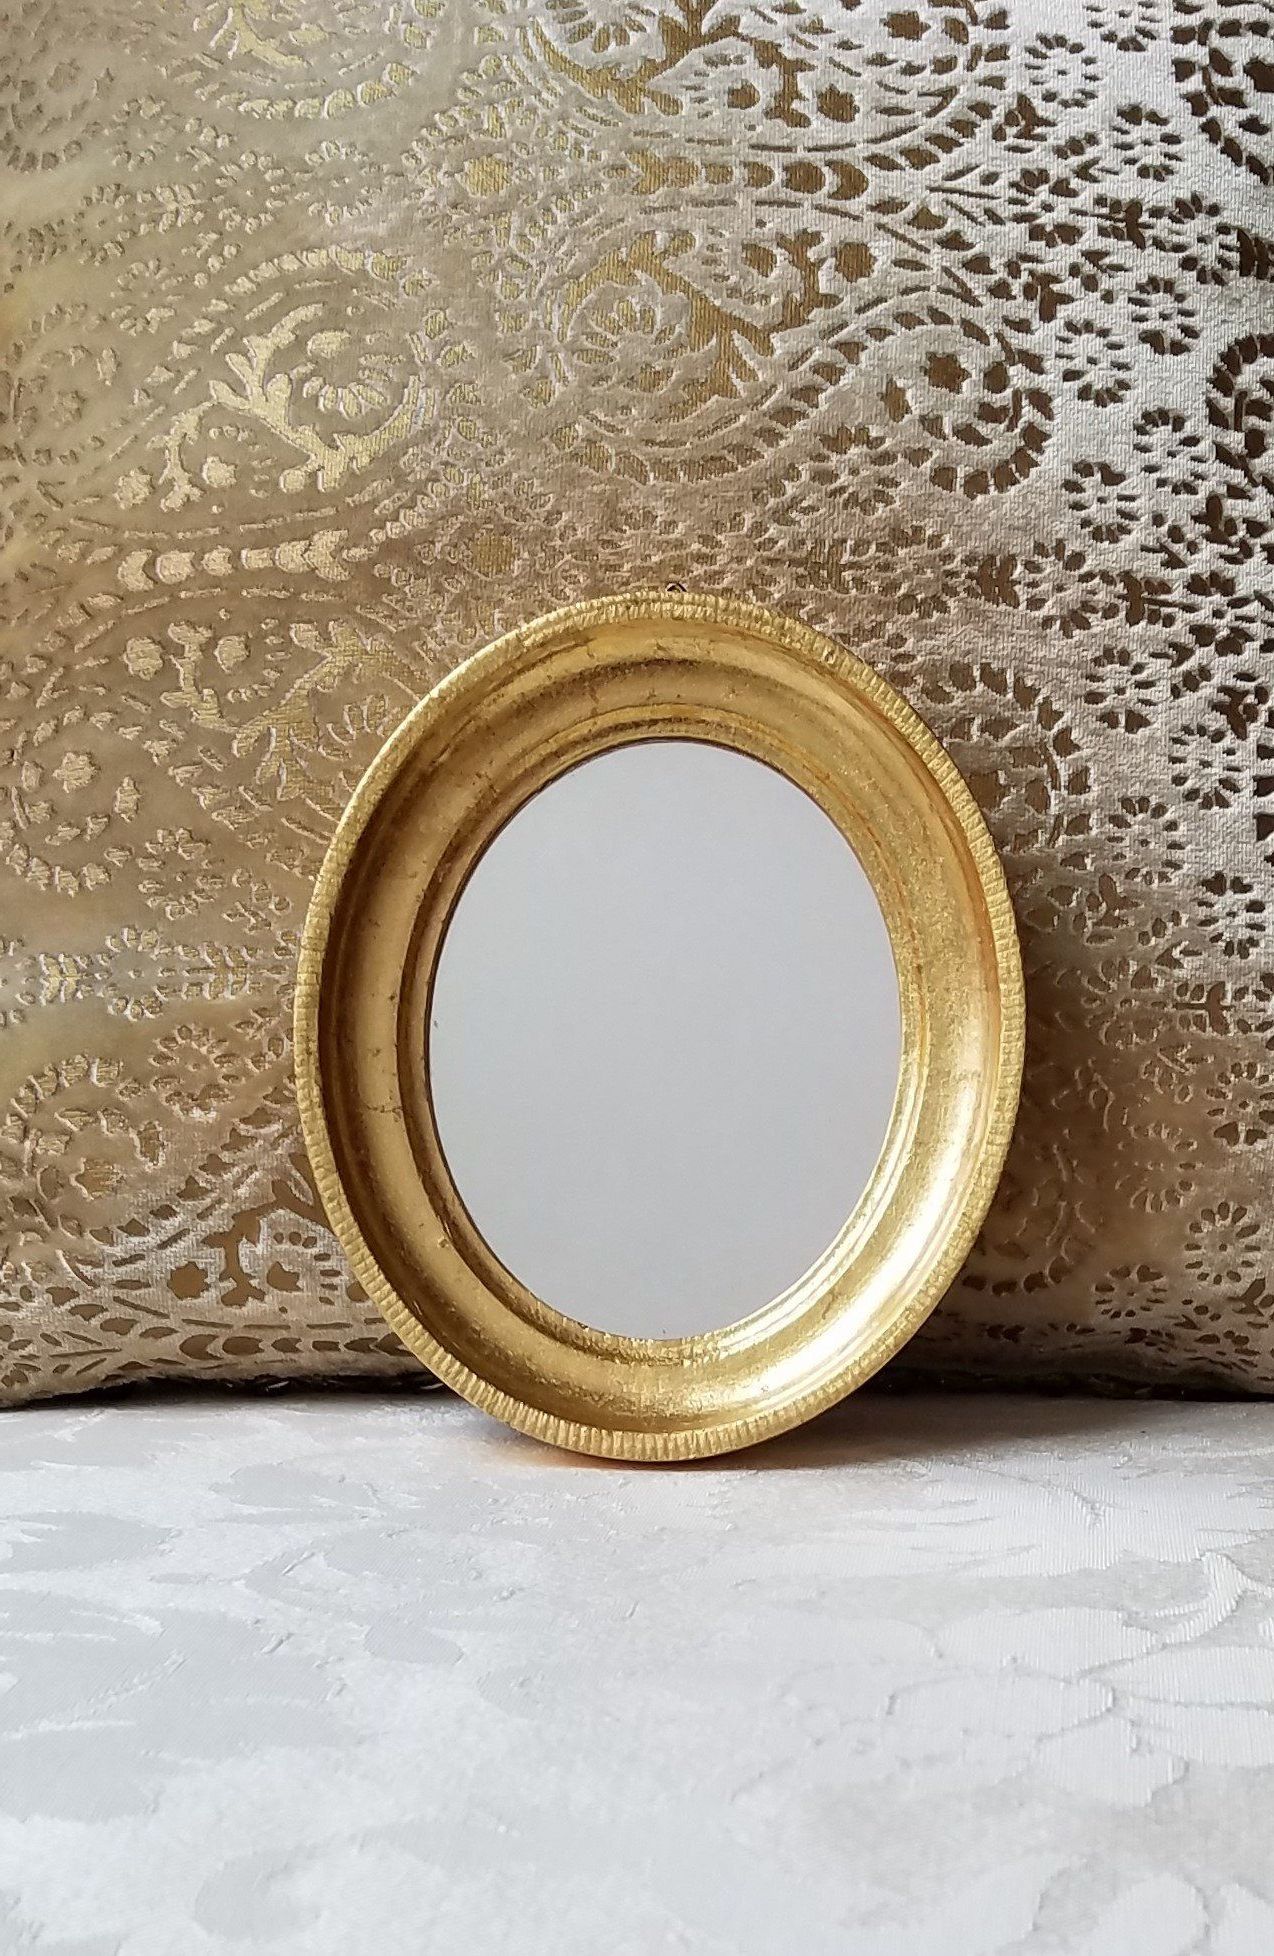 Vintage Gold Wall Mirror Small Oval Florentine Beveled Made In Italy In Latest Gold Metal Mirrored Wall Art (View 14 of 15)